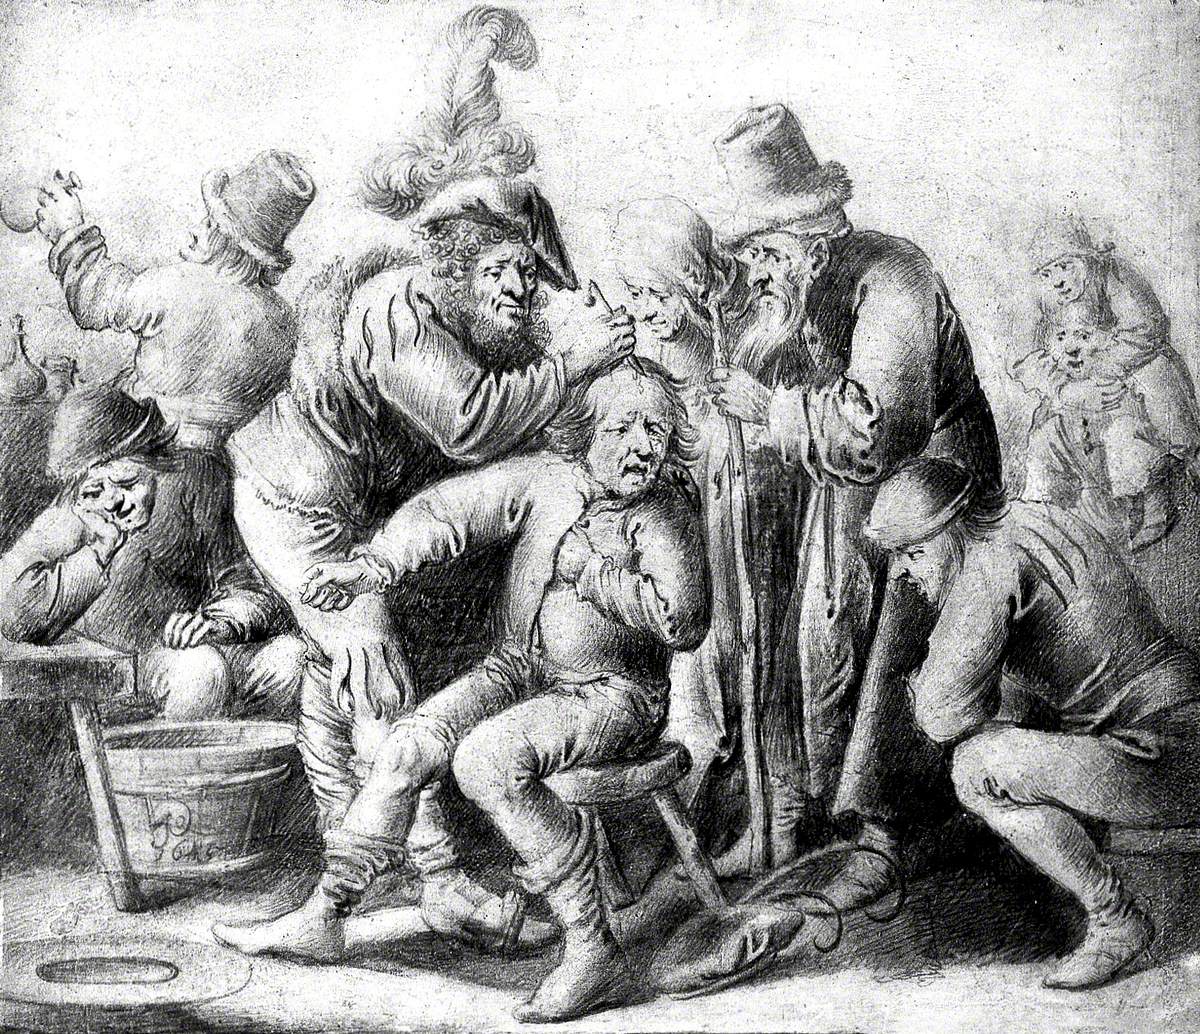 An Itinerant Surgeon Extracting Stones from a Man's Head; Symbolising the Expulsion of 'Folly' (Insanity), They Are Surrounded by a Group of People